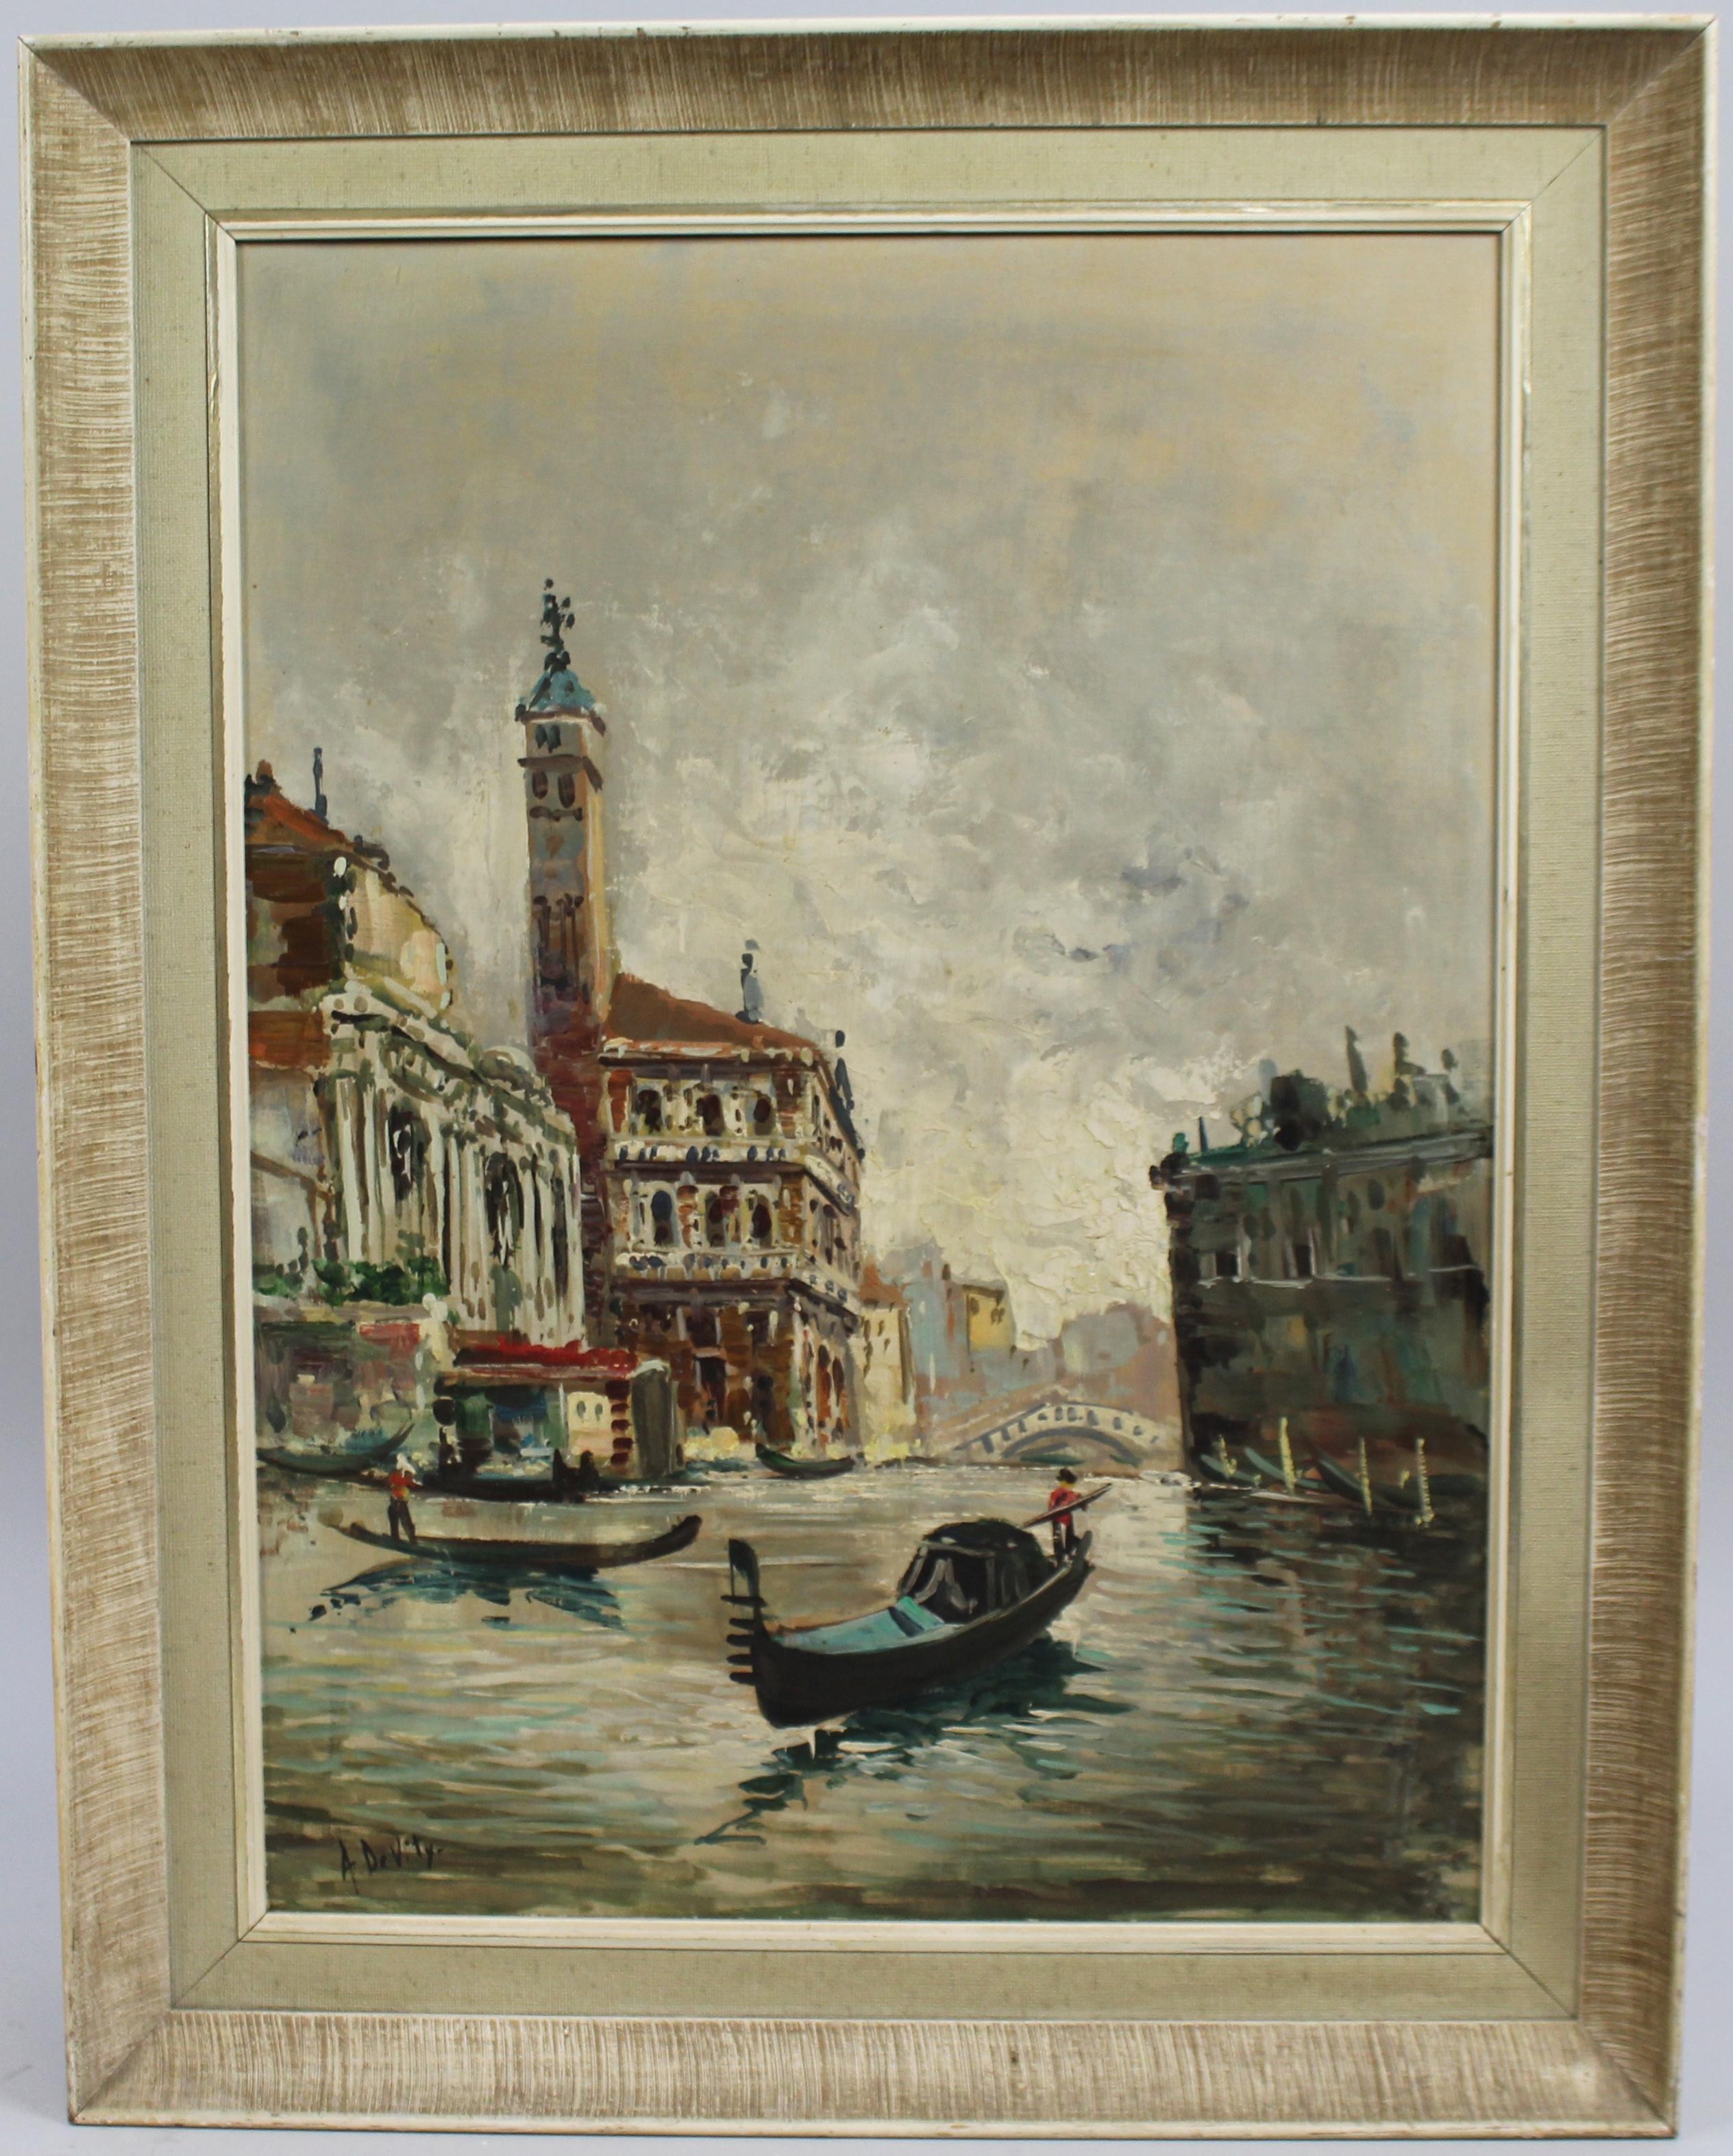 Antonio DeVity (Italian, 1901-1993) Venice Canal oil on canvas



Artist Antonio DeVity (Italian, 1901-1993)

Medium oil on canvas

Frame size 64 x 84 cm / 25 x 33 in

Signed Signed by the artist to the bottom left

Frame set in vintage